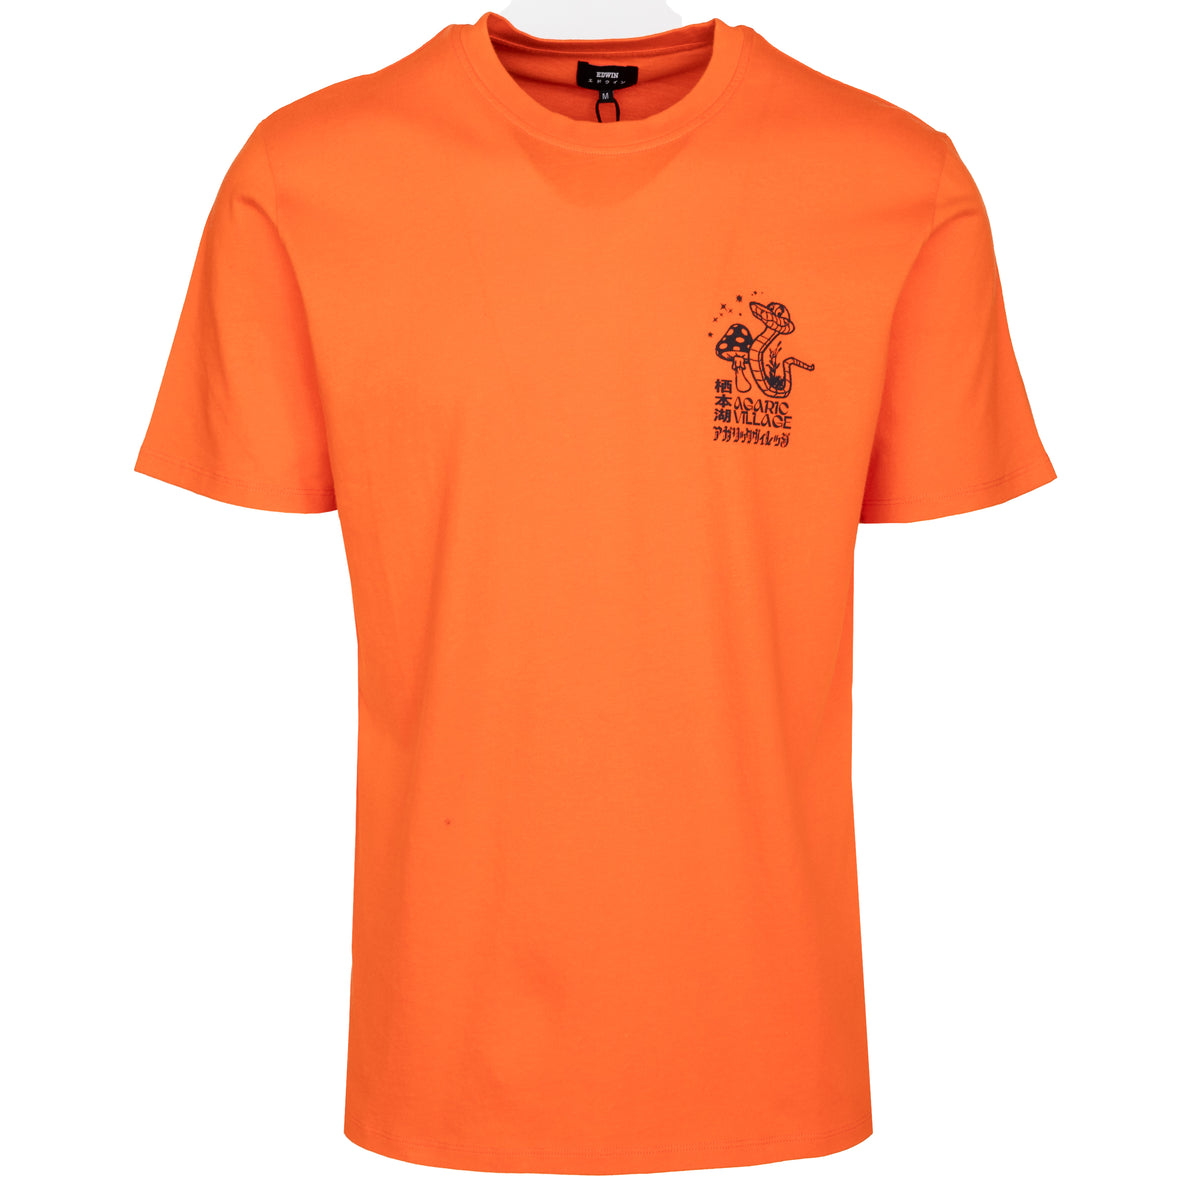 Load image into Gallery viewer, EDWIN Tangerine Agaric Village Tee
